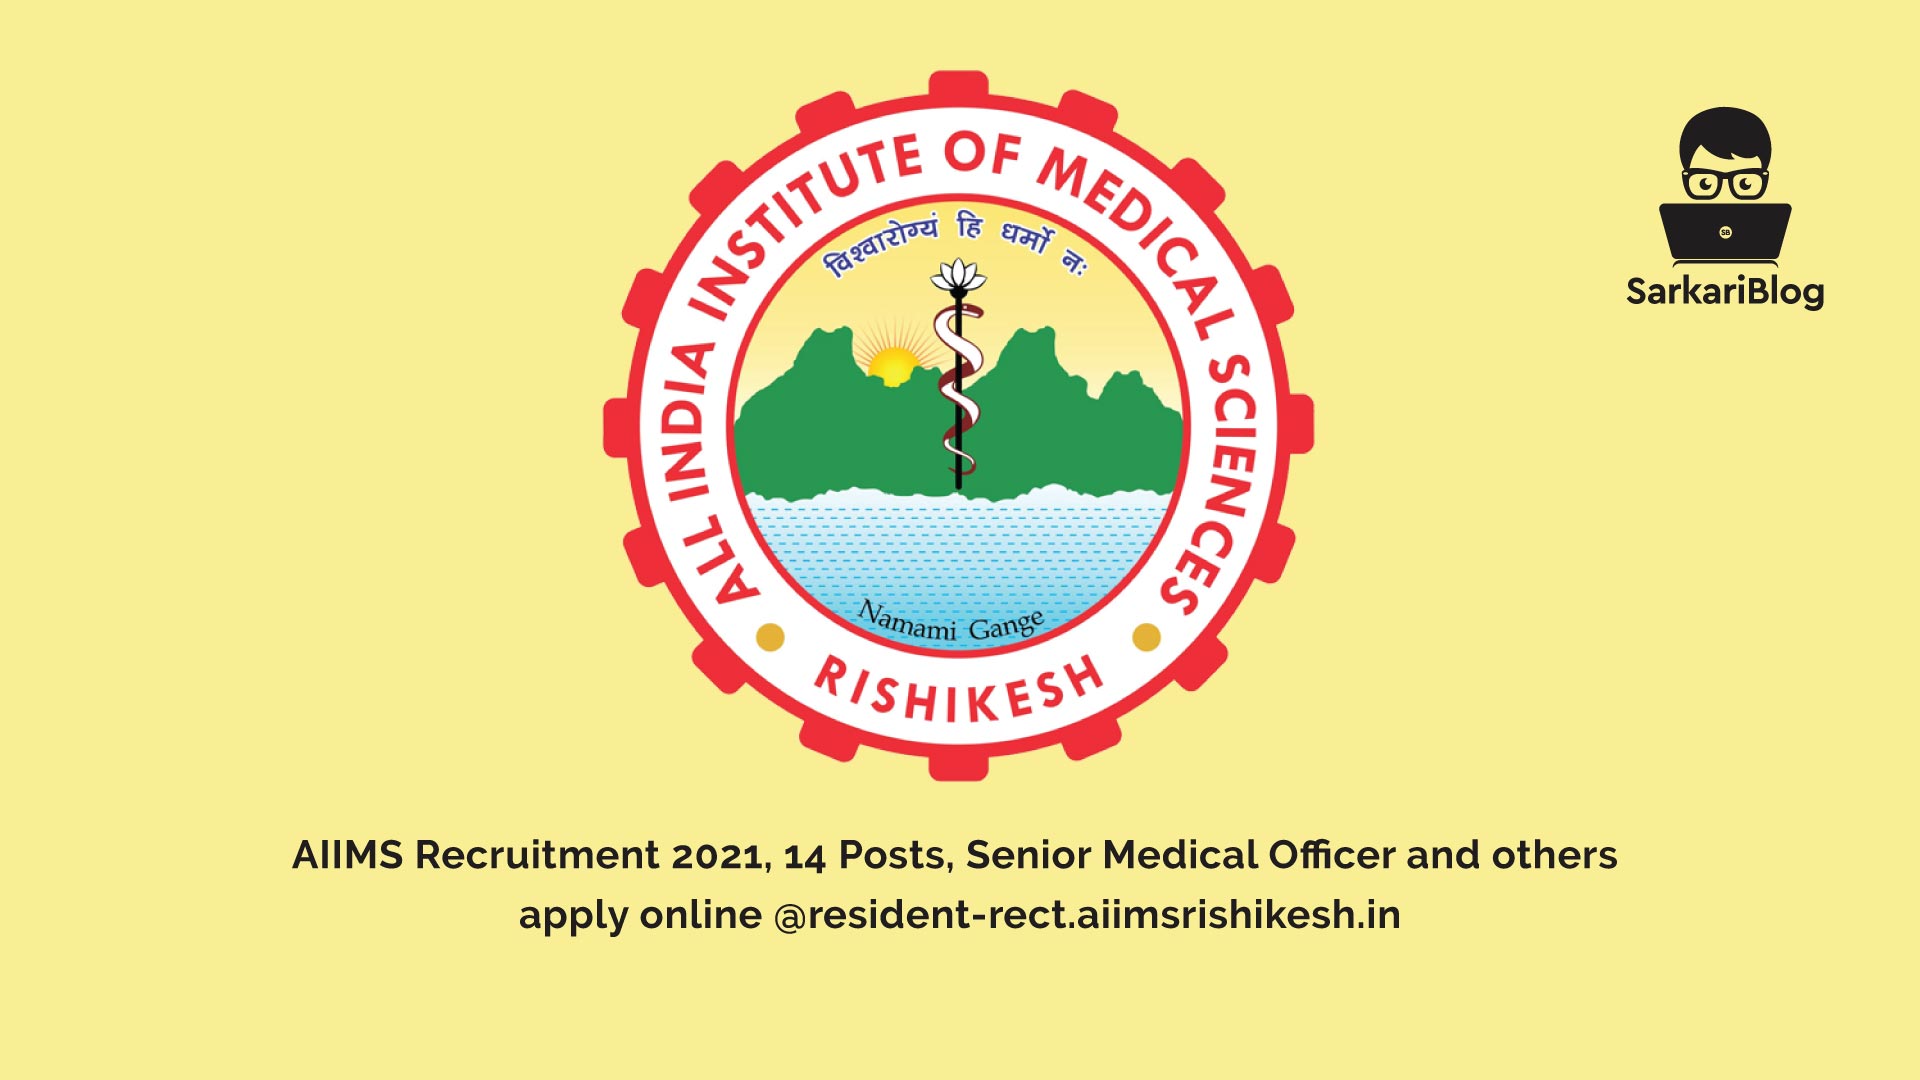 AIIMS Recruitment 2021, 14 Posts, Senior Medical Officer and others apply @ resident-rect.aiimsrishikesh.in